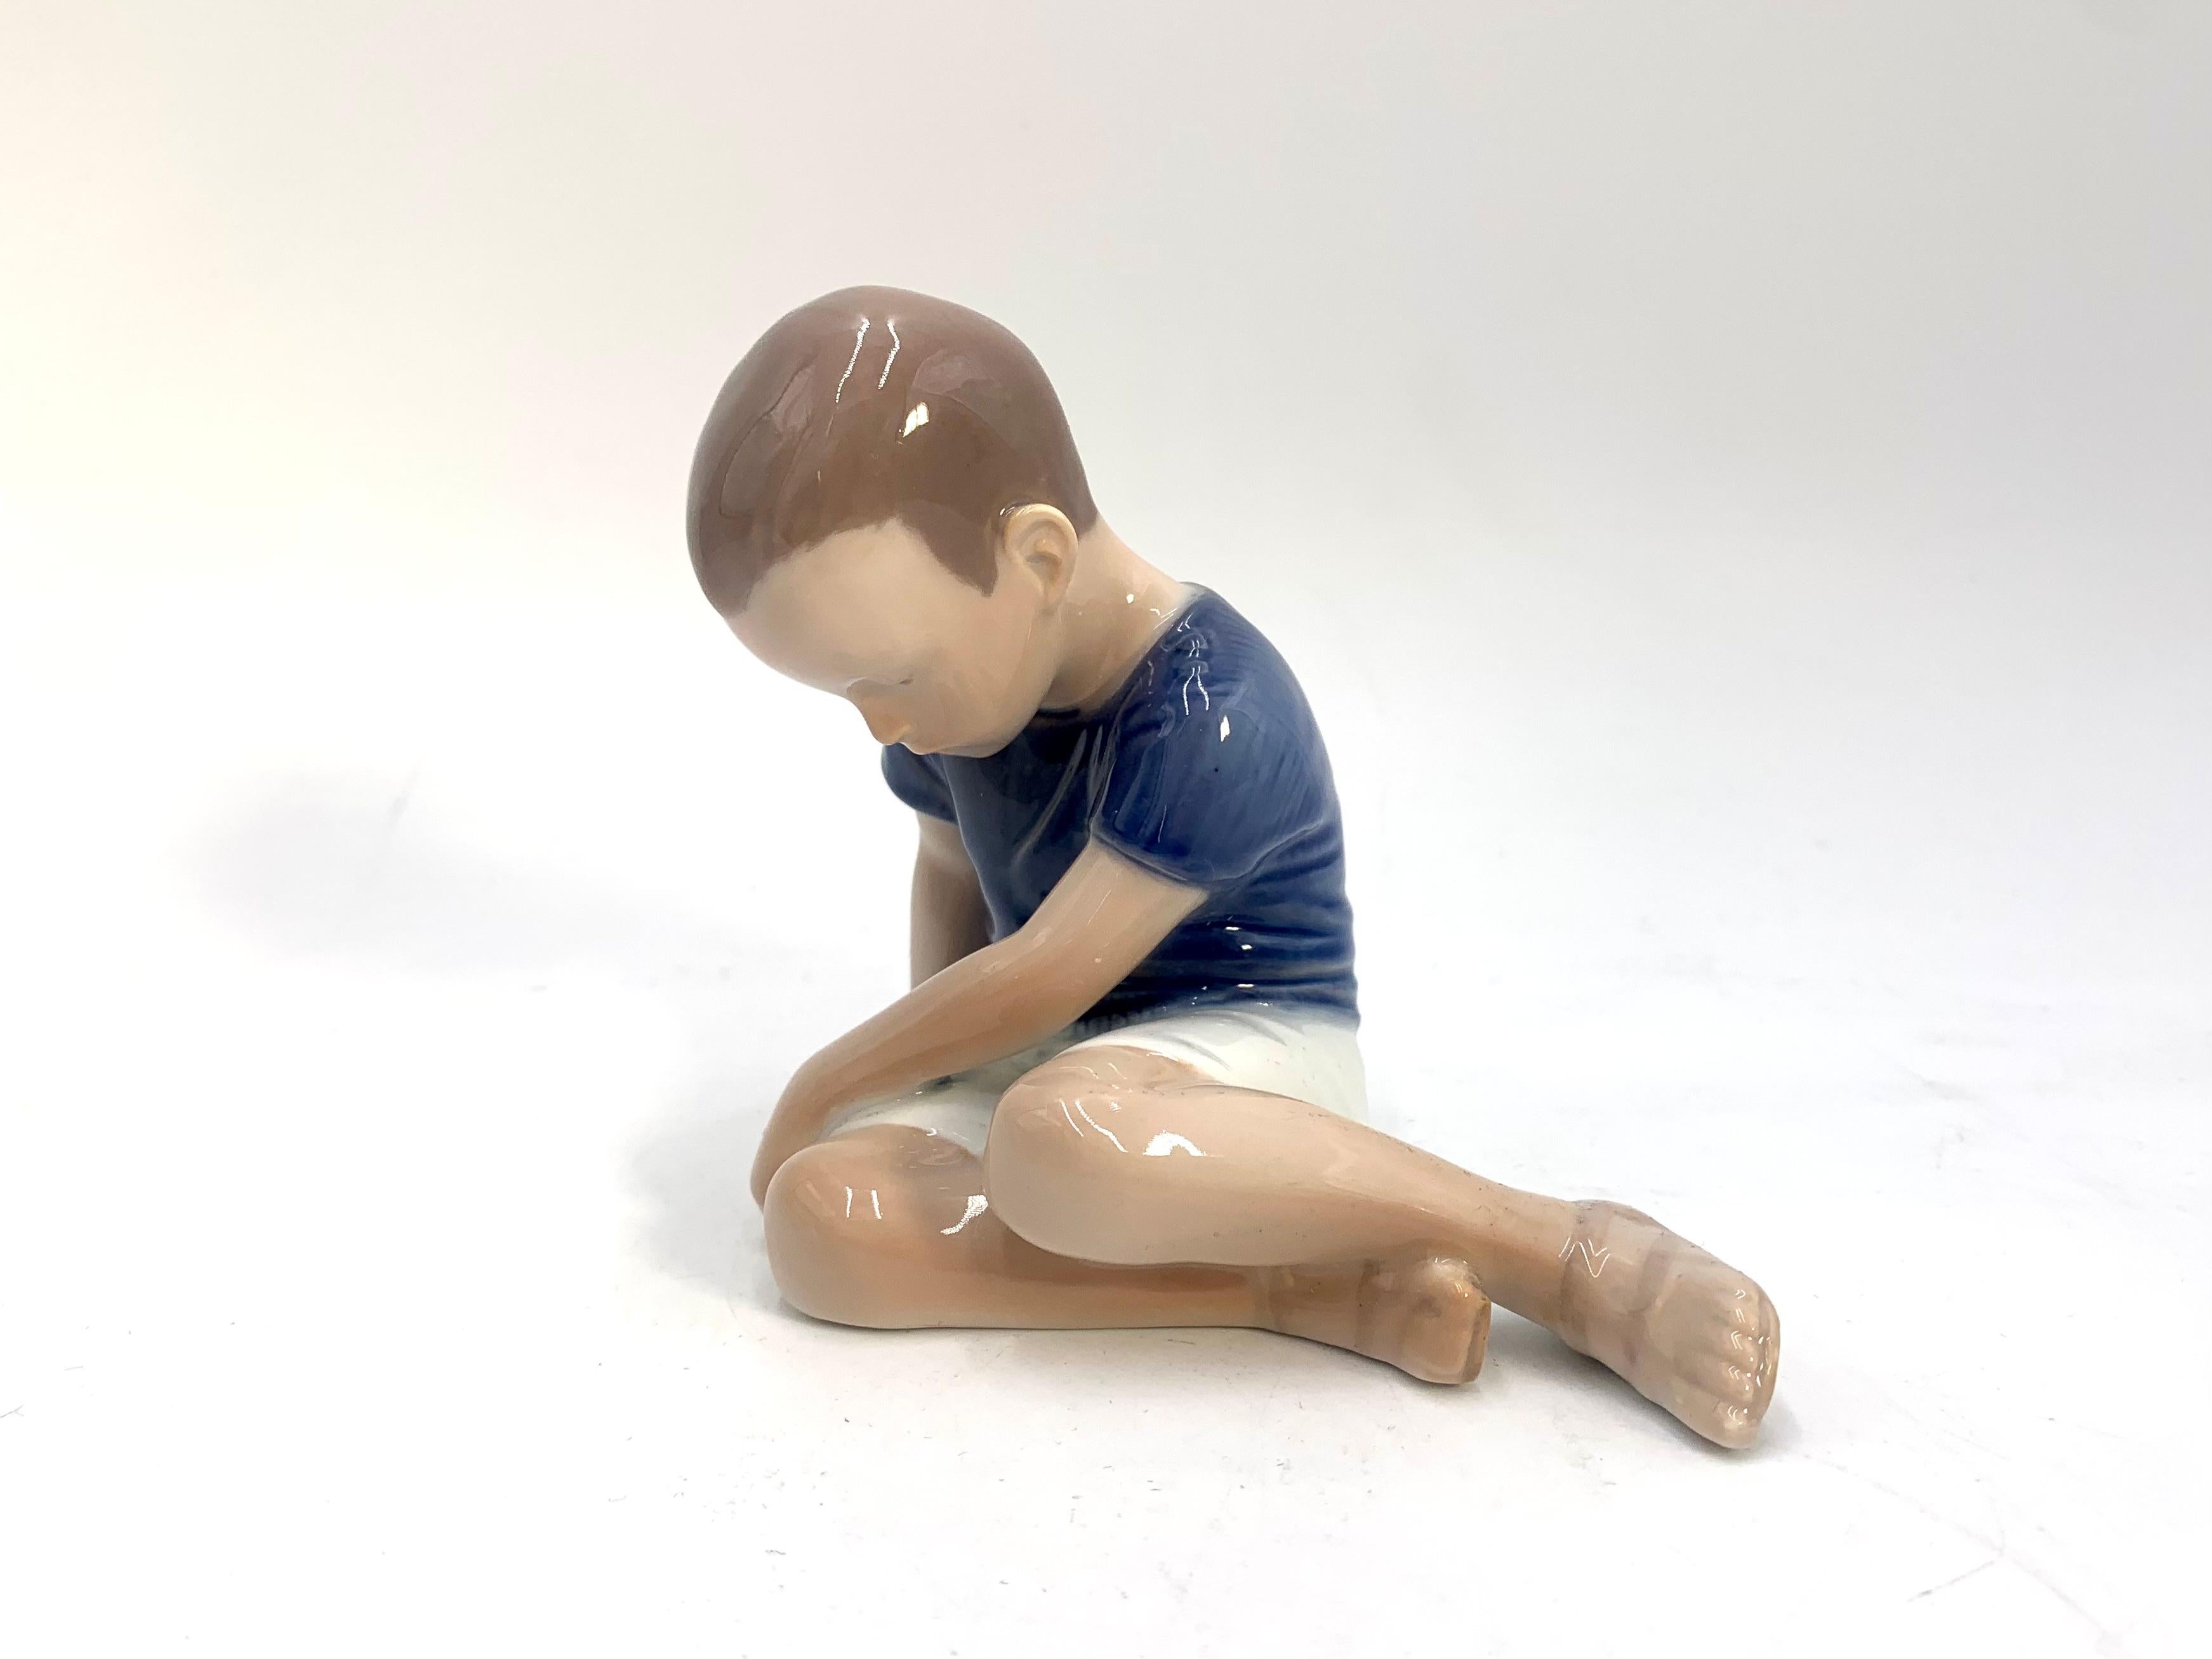 Porcelain figurine of a boy

Made in Denmark by Bing & Grondahl

Manufactured in the 1980s.

Model number # 1671

Very good condition, no damage

Measures: height 10cm, width 12cm, depth 7cm.